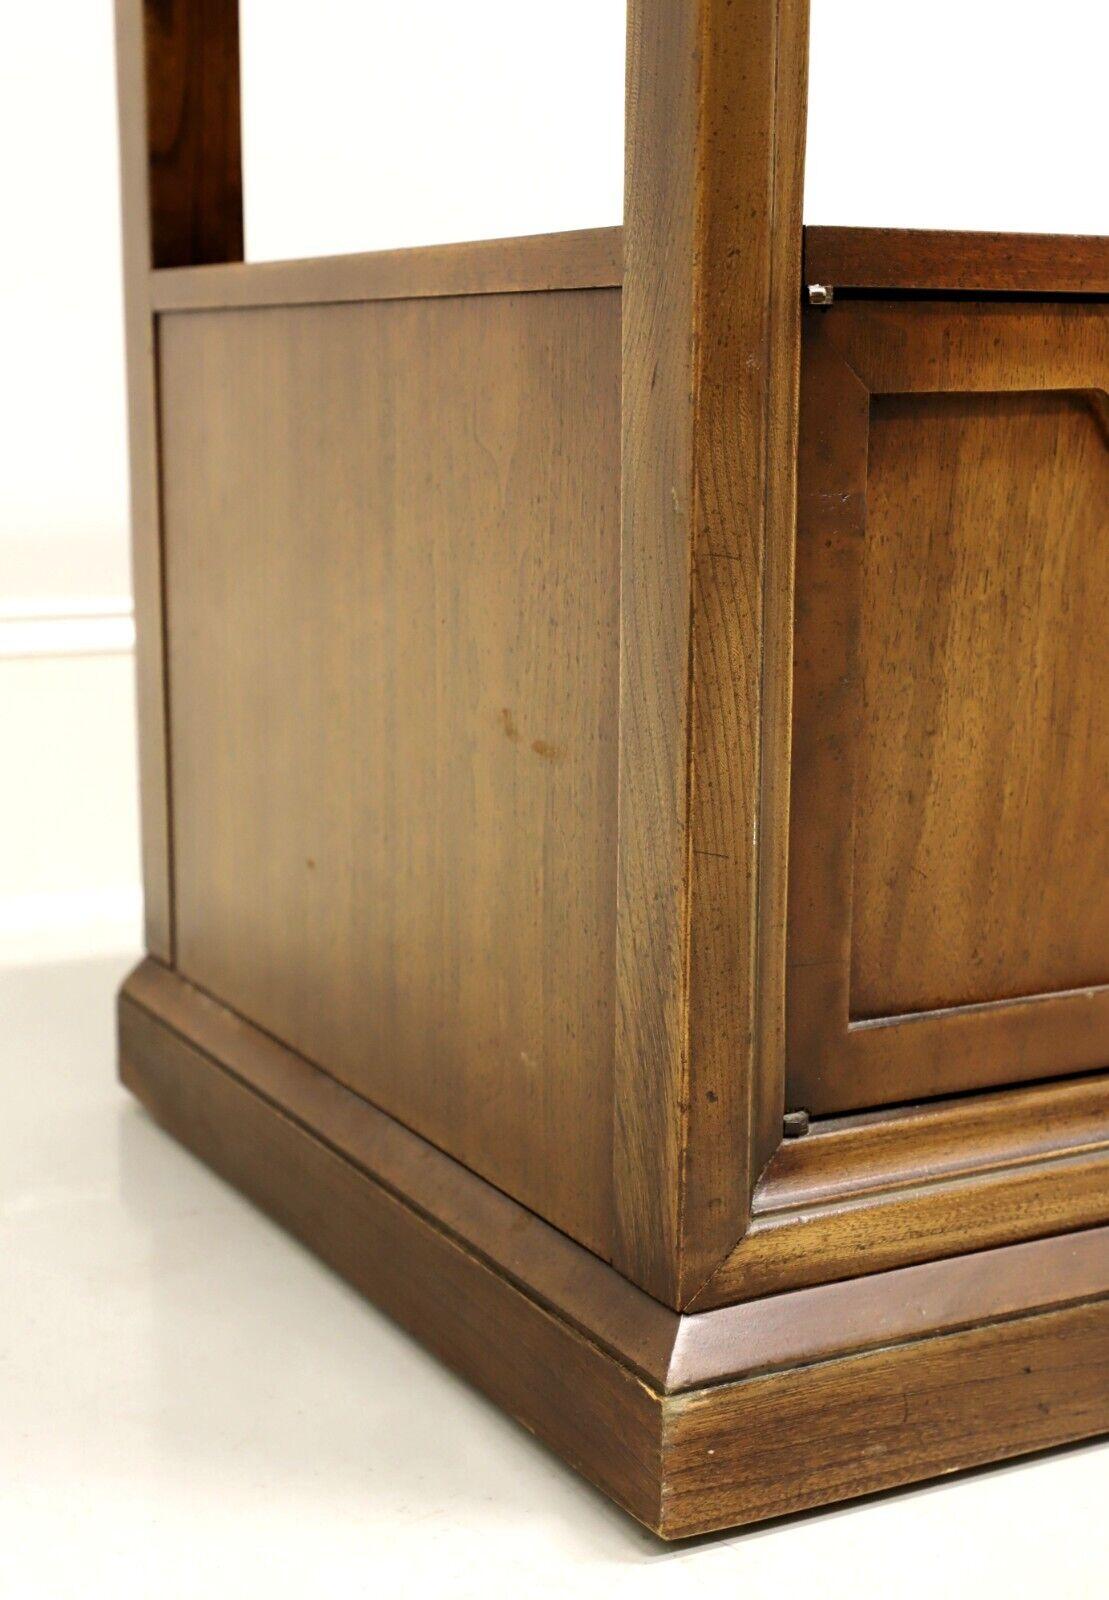 FANCHER 1960's Walnut Neoclassical Nightstands - Pair For Sale 1